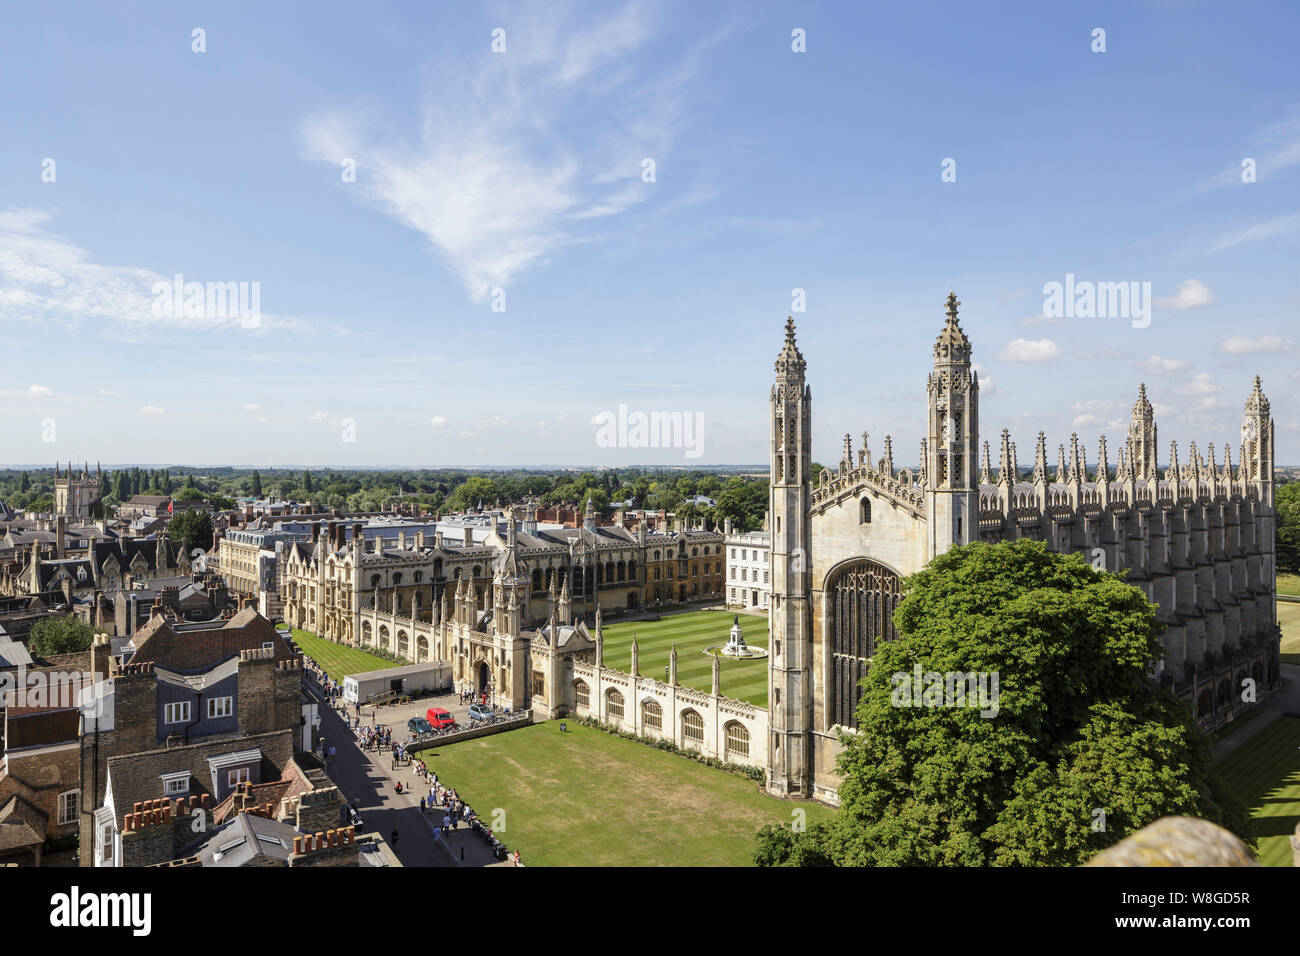 King’s College Chapel and King’s College in Cambridge, UK. Stock Photo